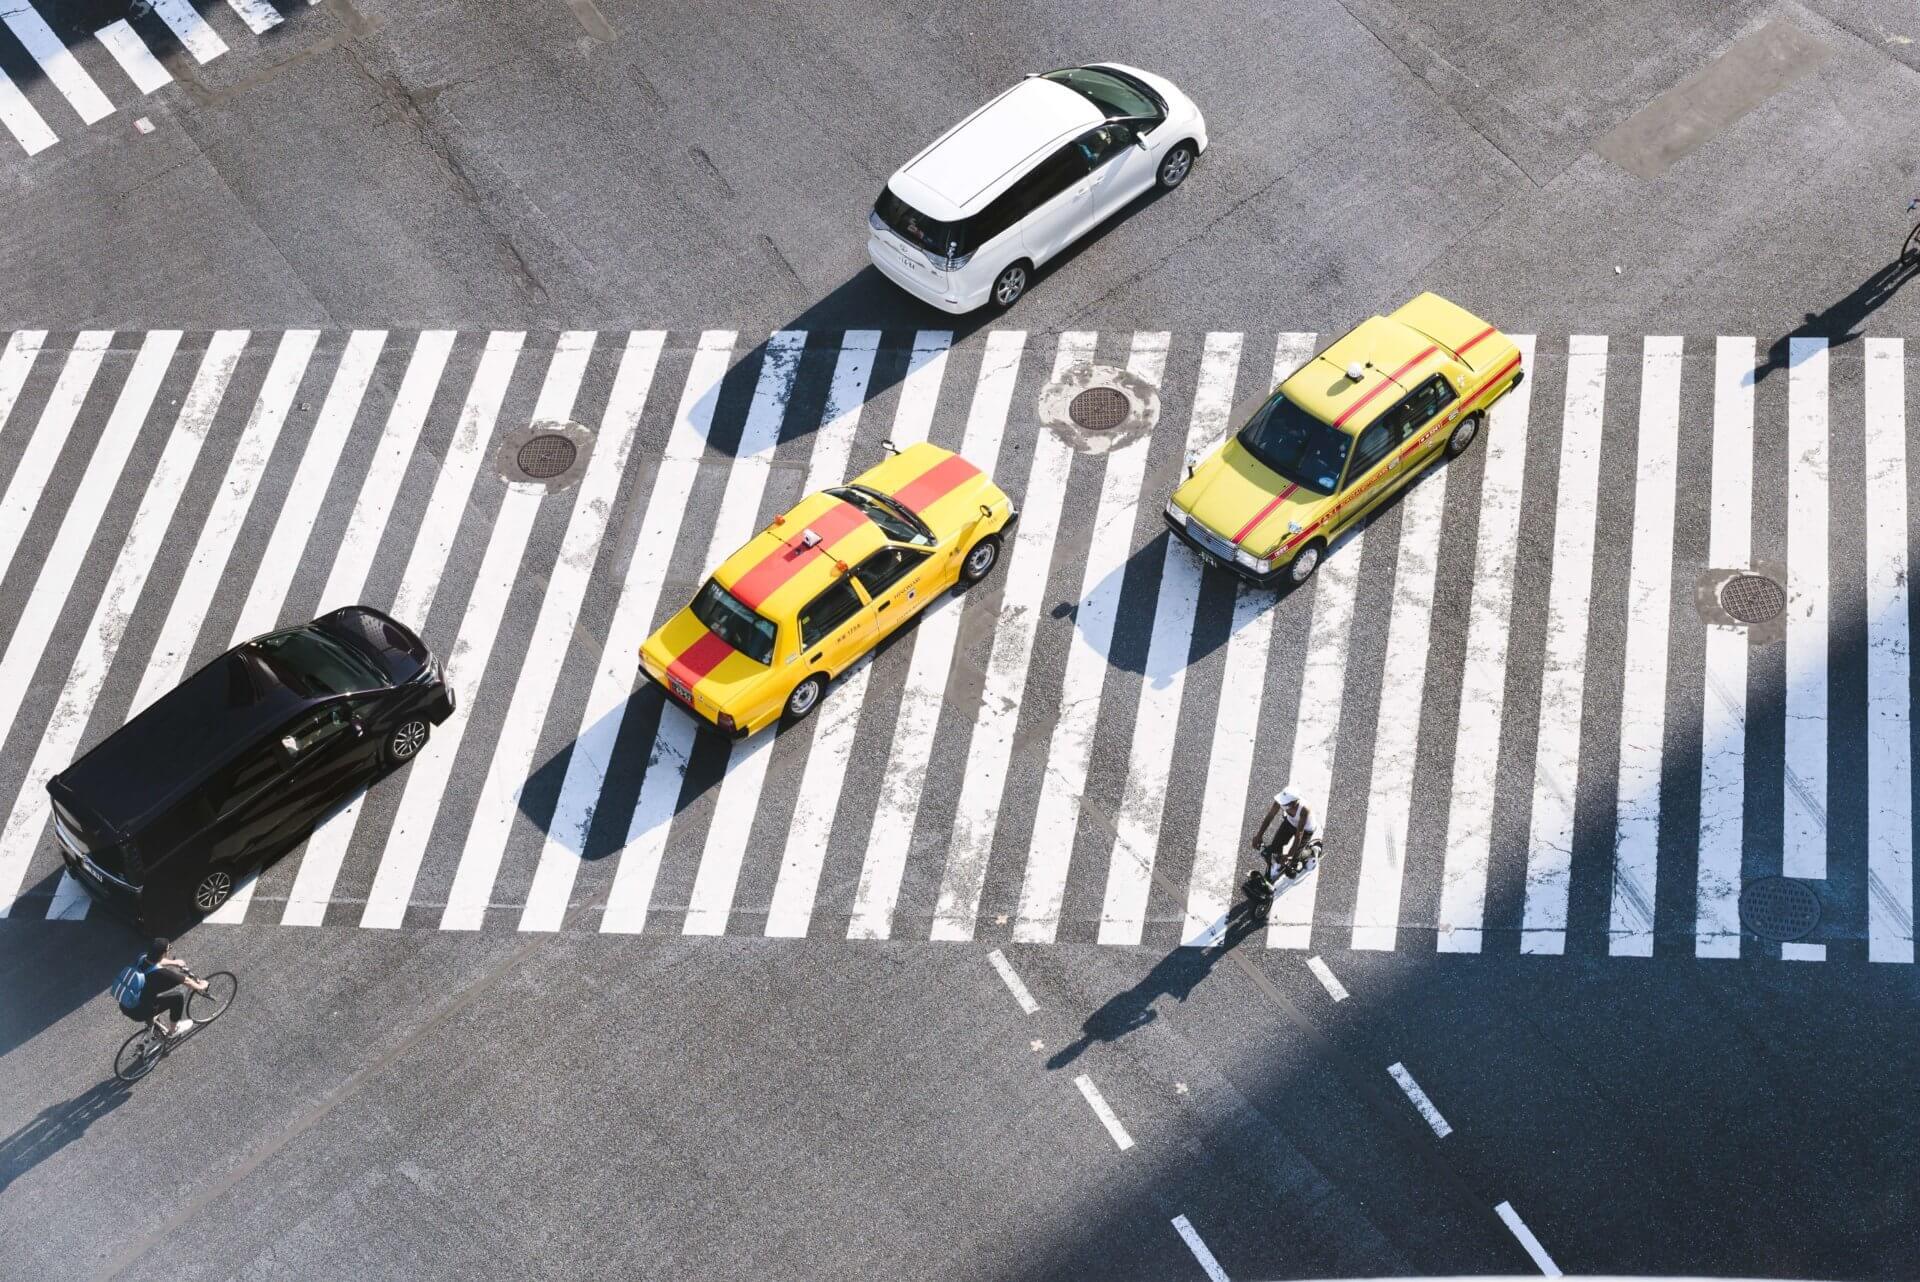 Pedestrian Safety: Are Your Crossings Safe for the Visually Impaired?